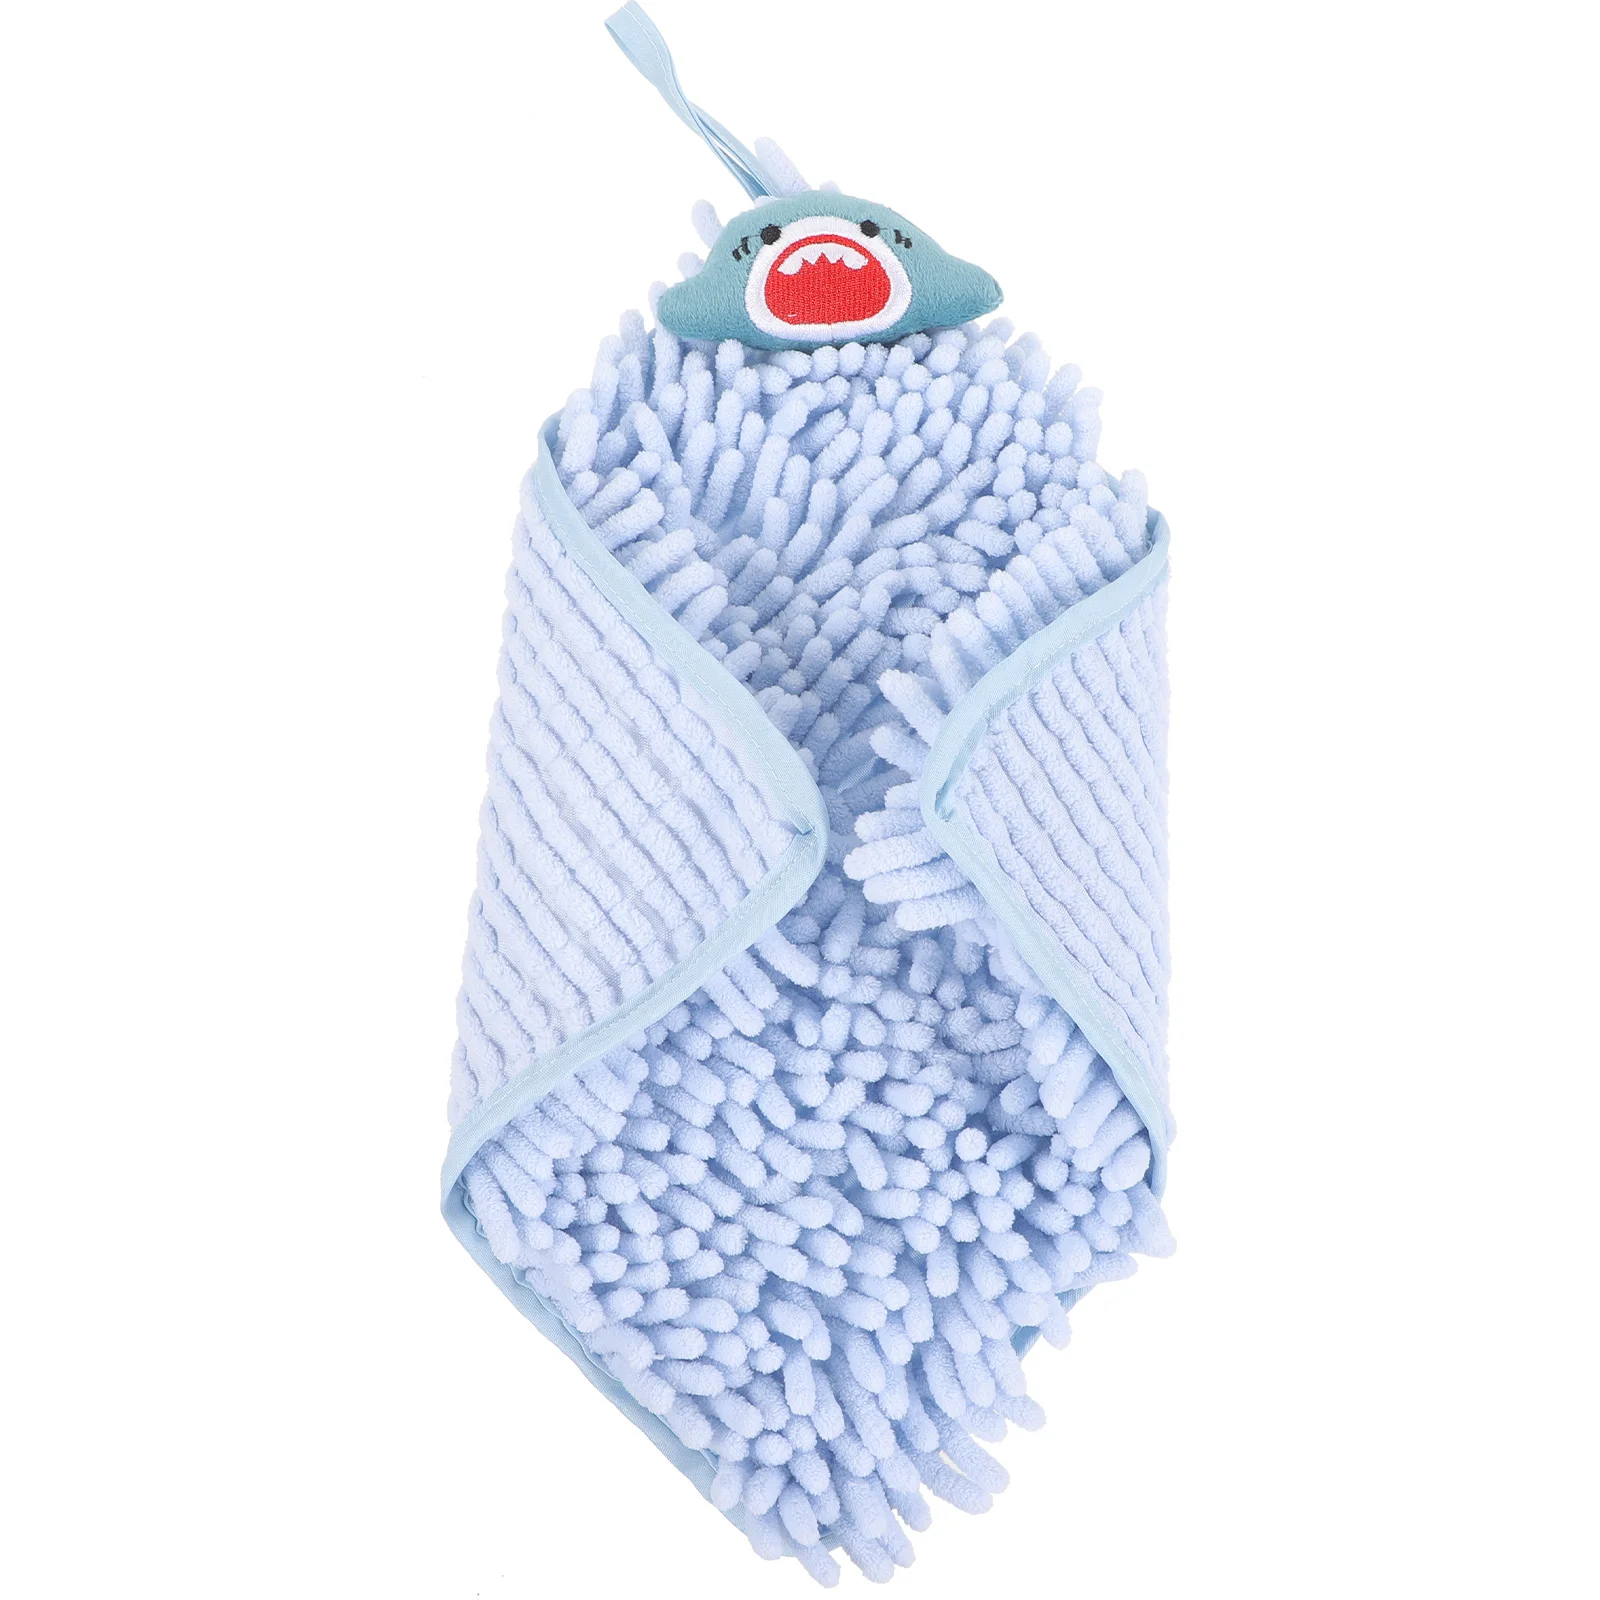 

Hand Towel Cute Towels Quick Dry Drying Bathroom Chenille Kitchen Washcloths Child